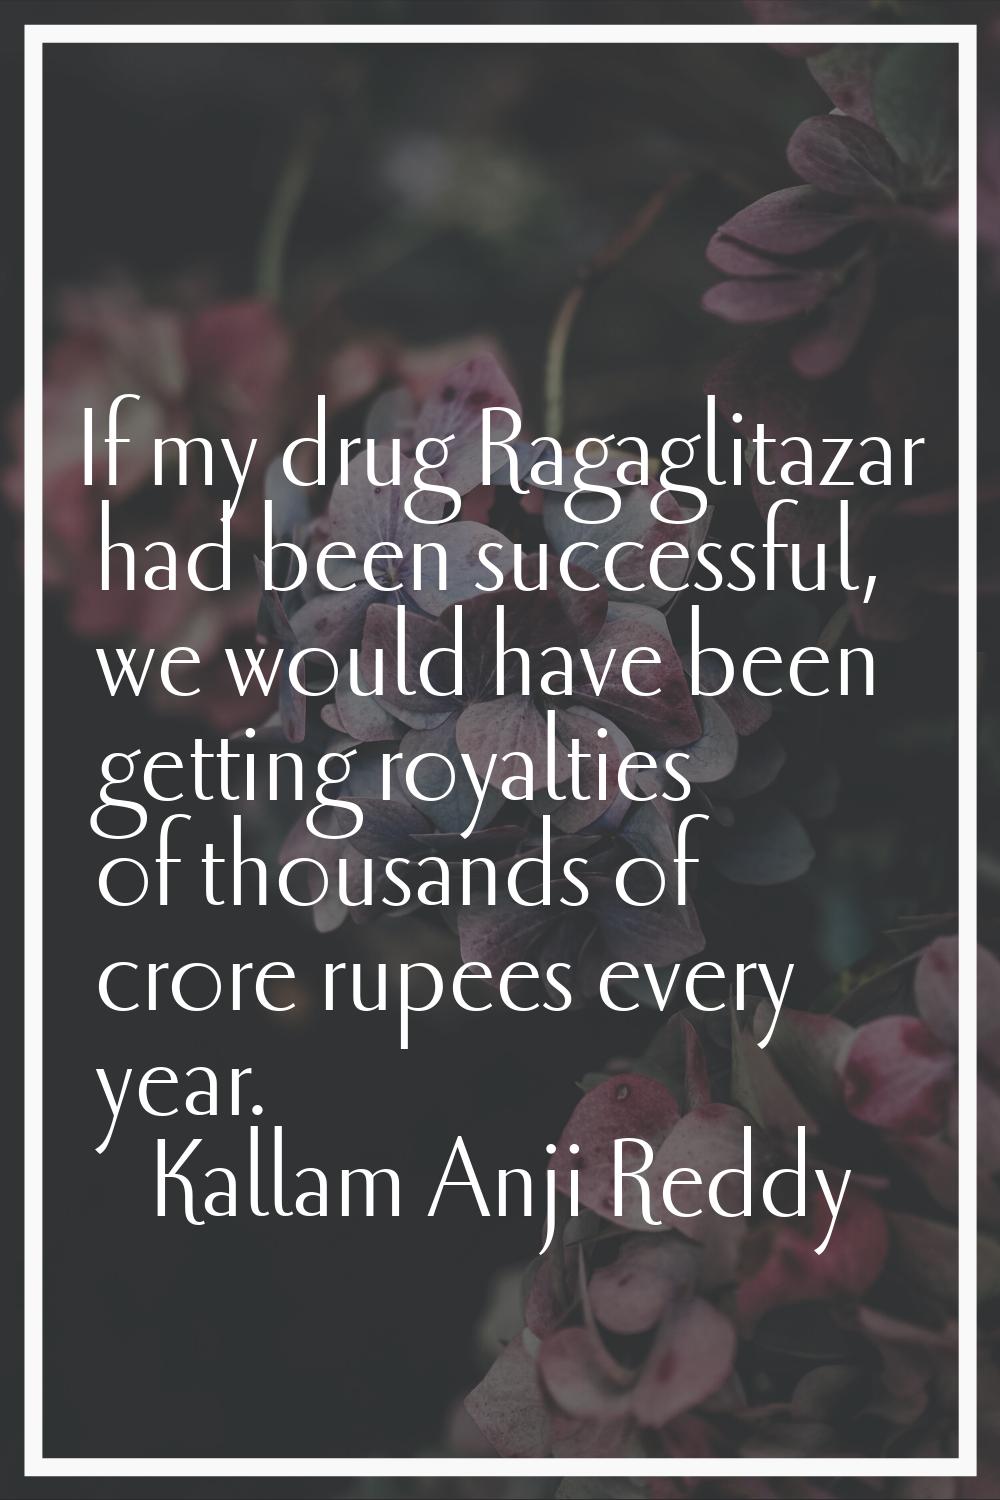 If my drug Ragaglitazar had been successful, we would have been getting royalties of thousands of c